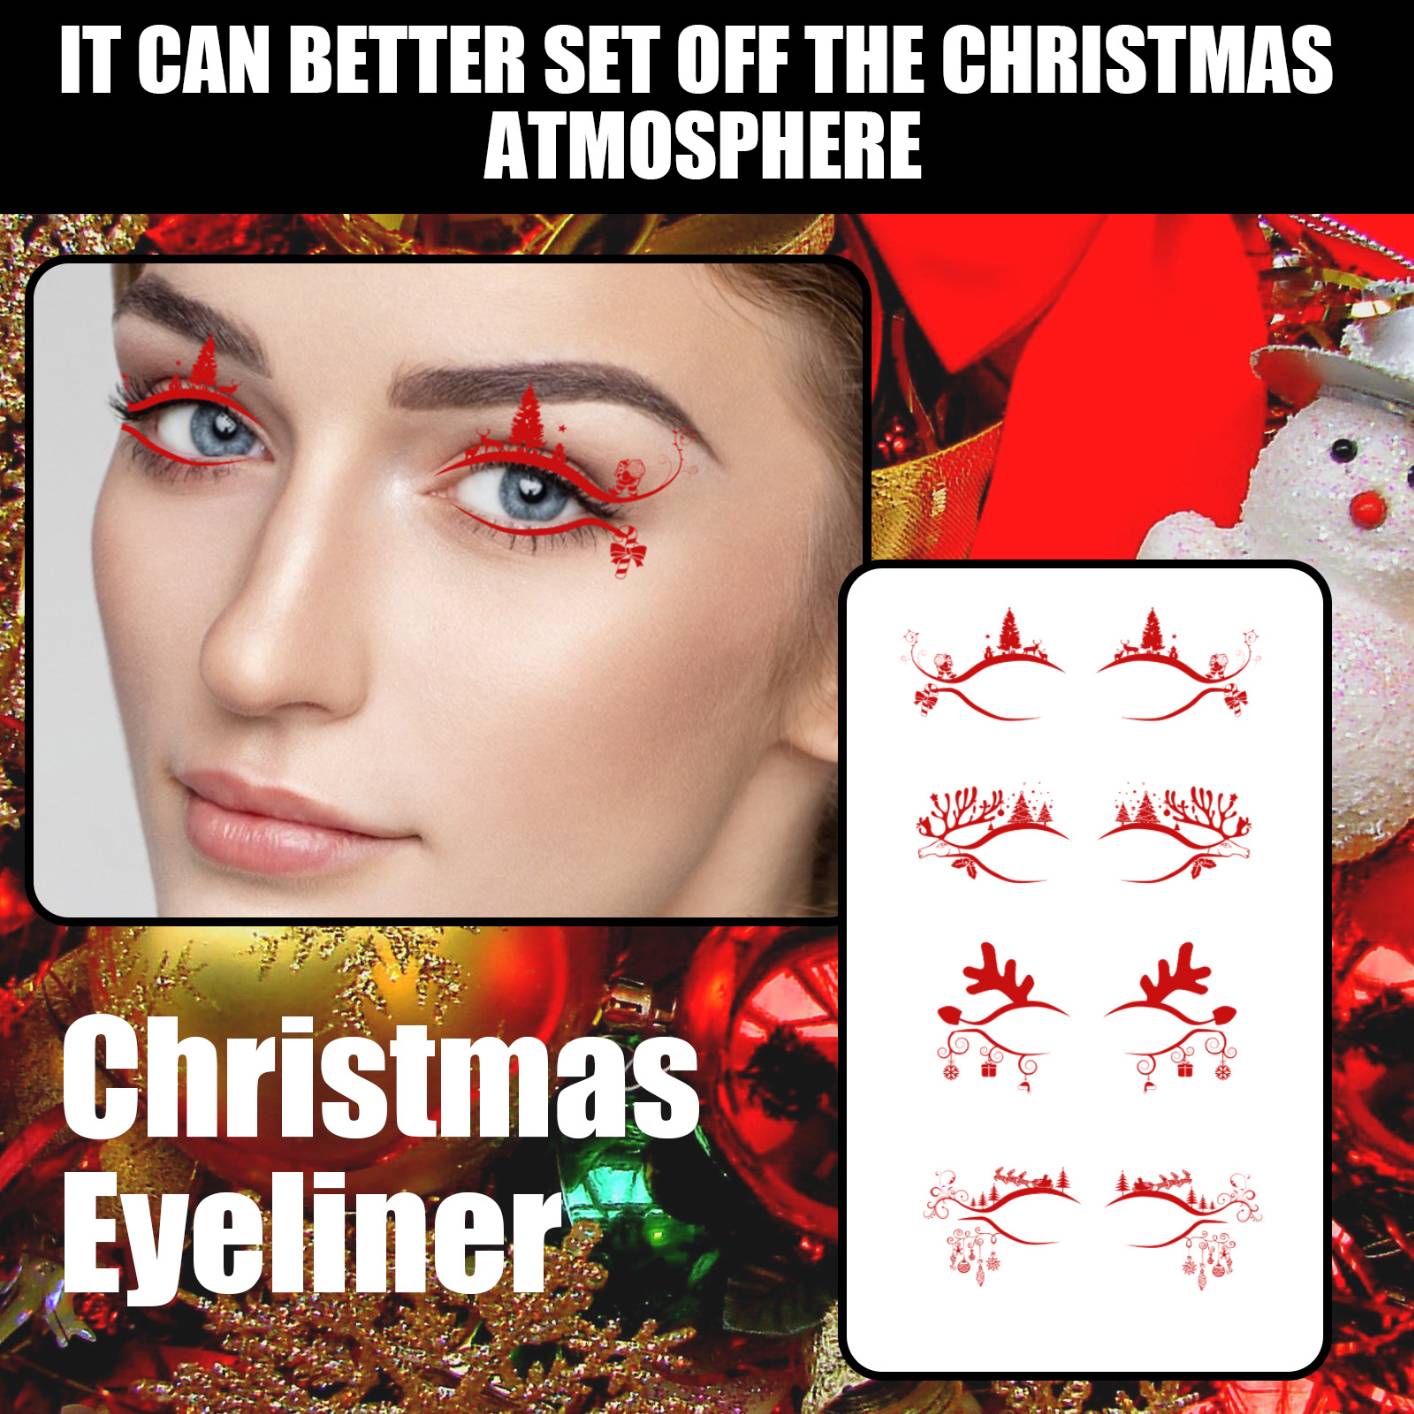 4 Pairs Creative Eyeliner Stickers Instant Eyeliner Stickers Self-adhesive Eye Line Strip Sticker Eye Makeup Tool for Christmas Party Decoration